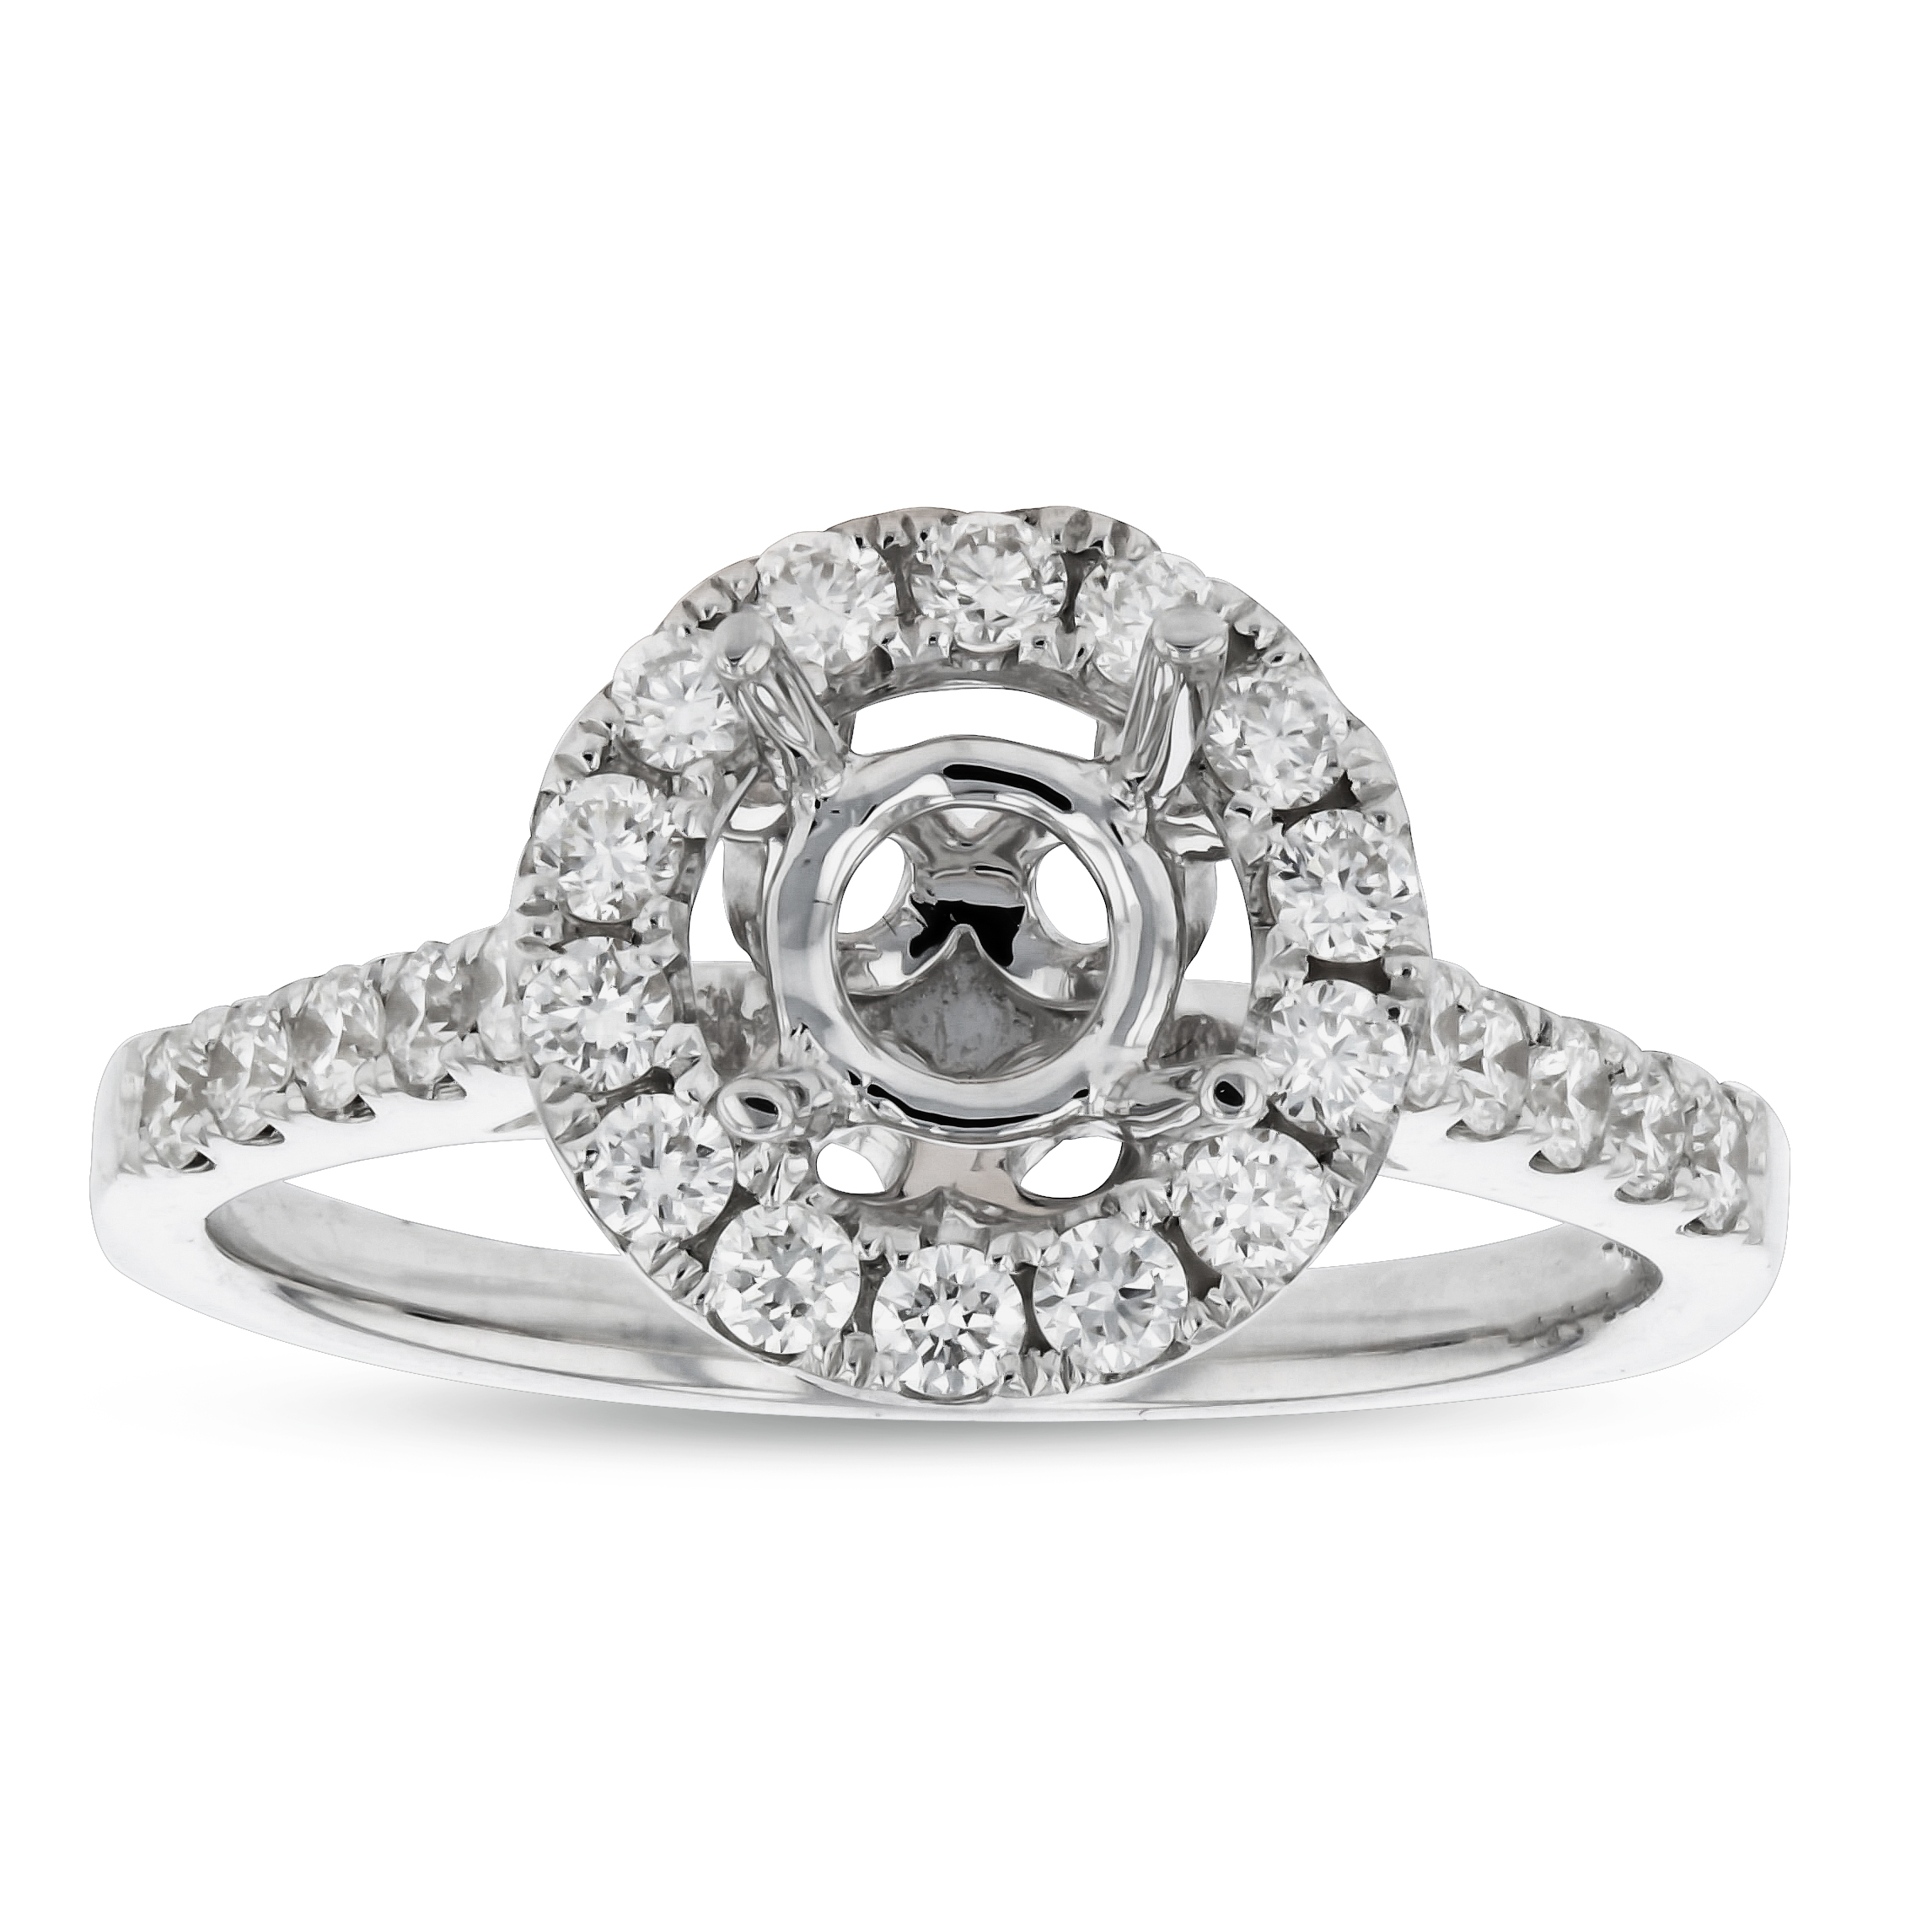 View 0.42ctw Diamond Semi Mount Engagement Ring in 18k White Gold